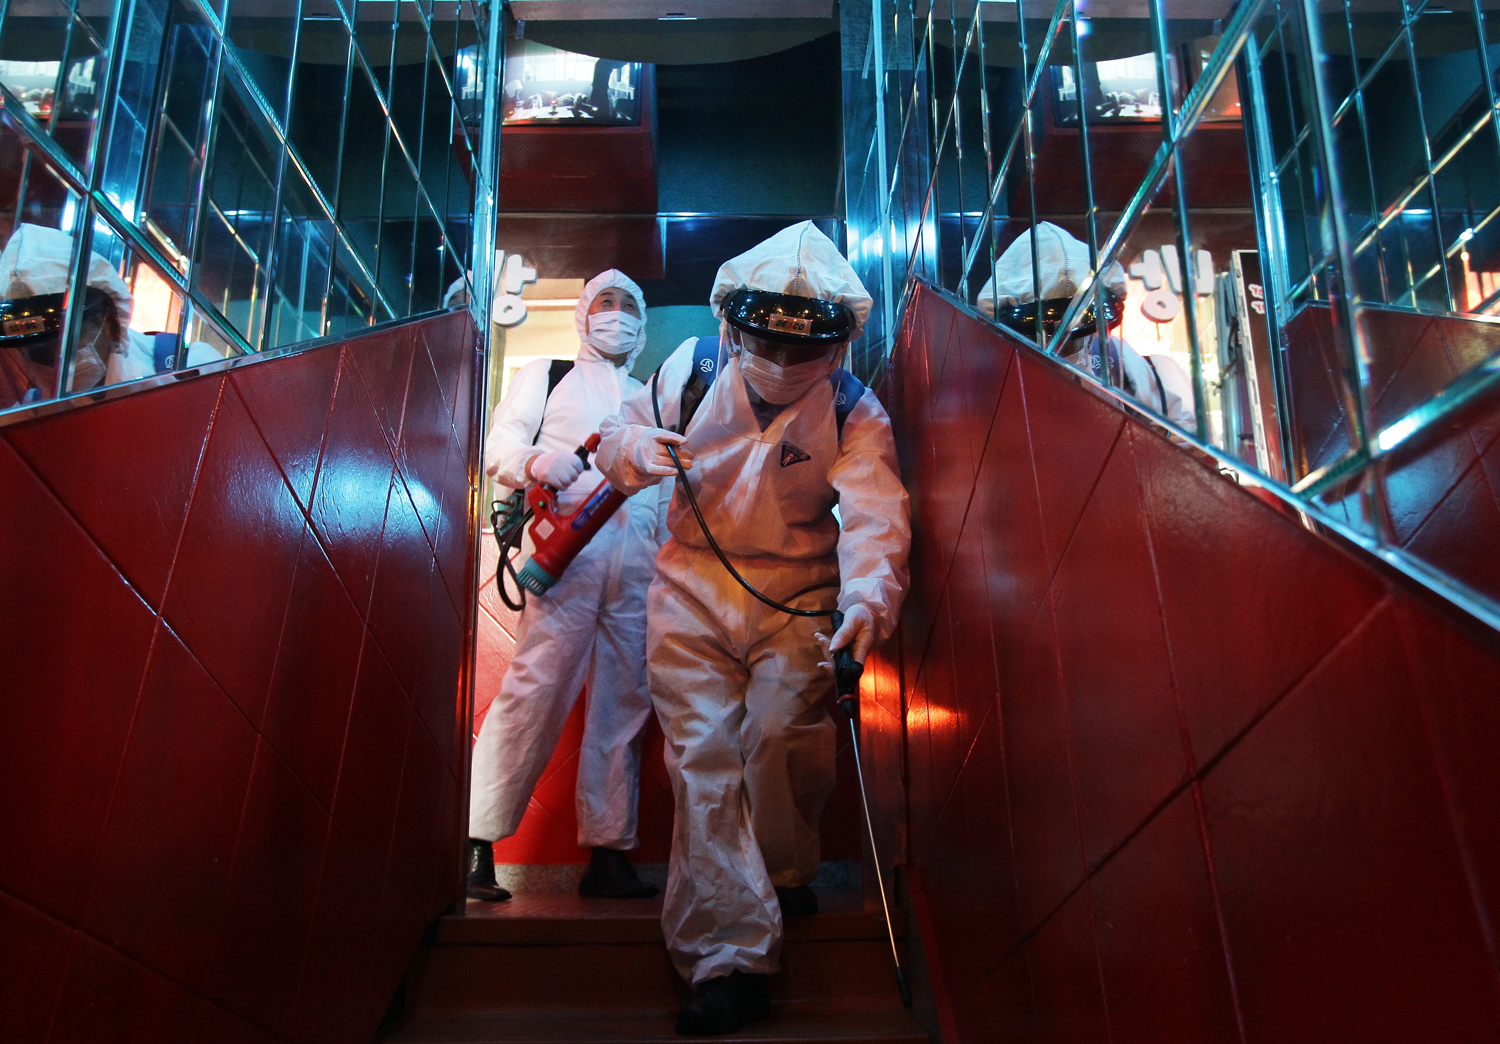 Disinfection workers wearing protective clothing spray anti-septic solution in a karaoke parlor on June 16, 2015 in Seoul, South Korea. (Chung Sung-Jun —Getty Images)